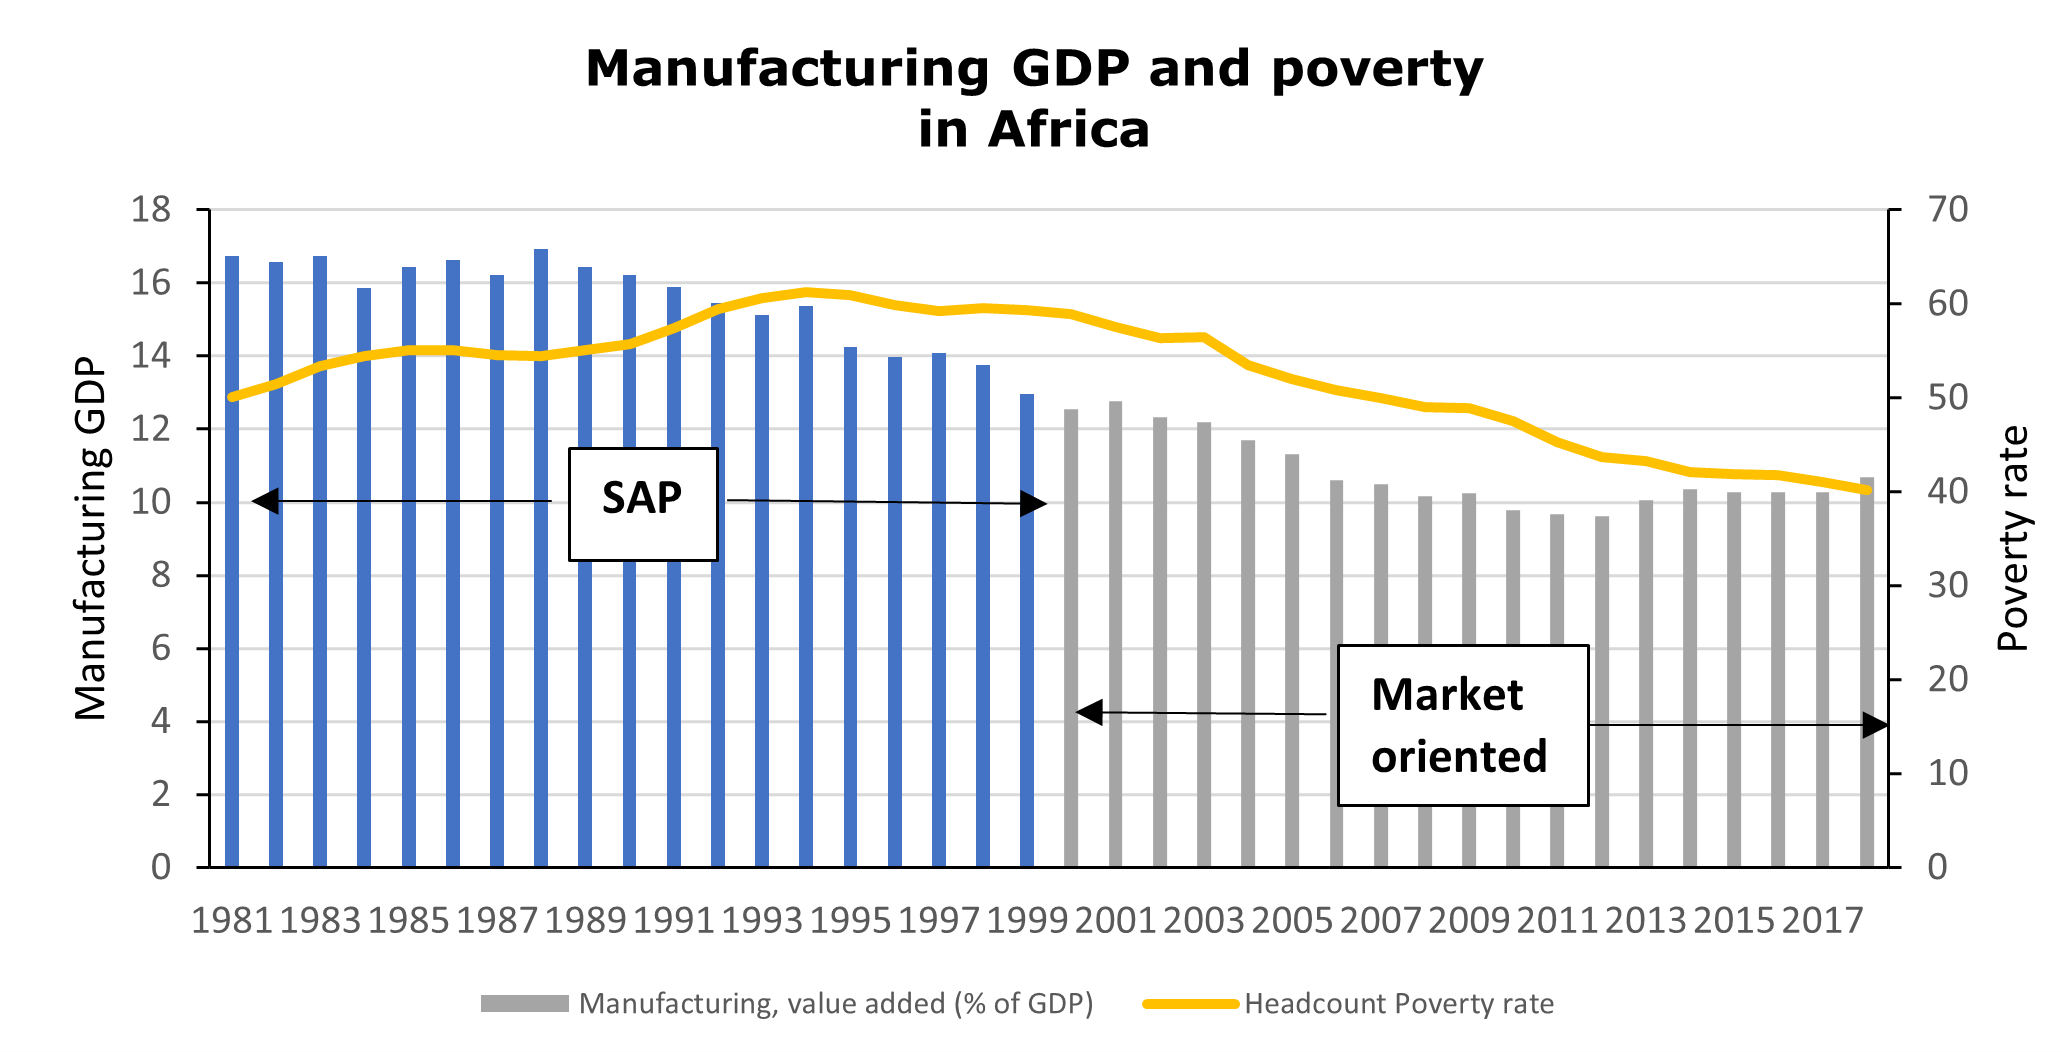 Figure of manufacturing GDP and poverty in Africa